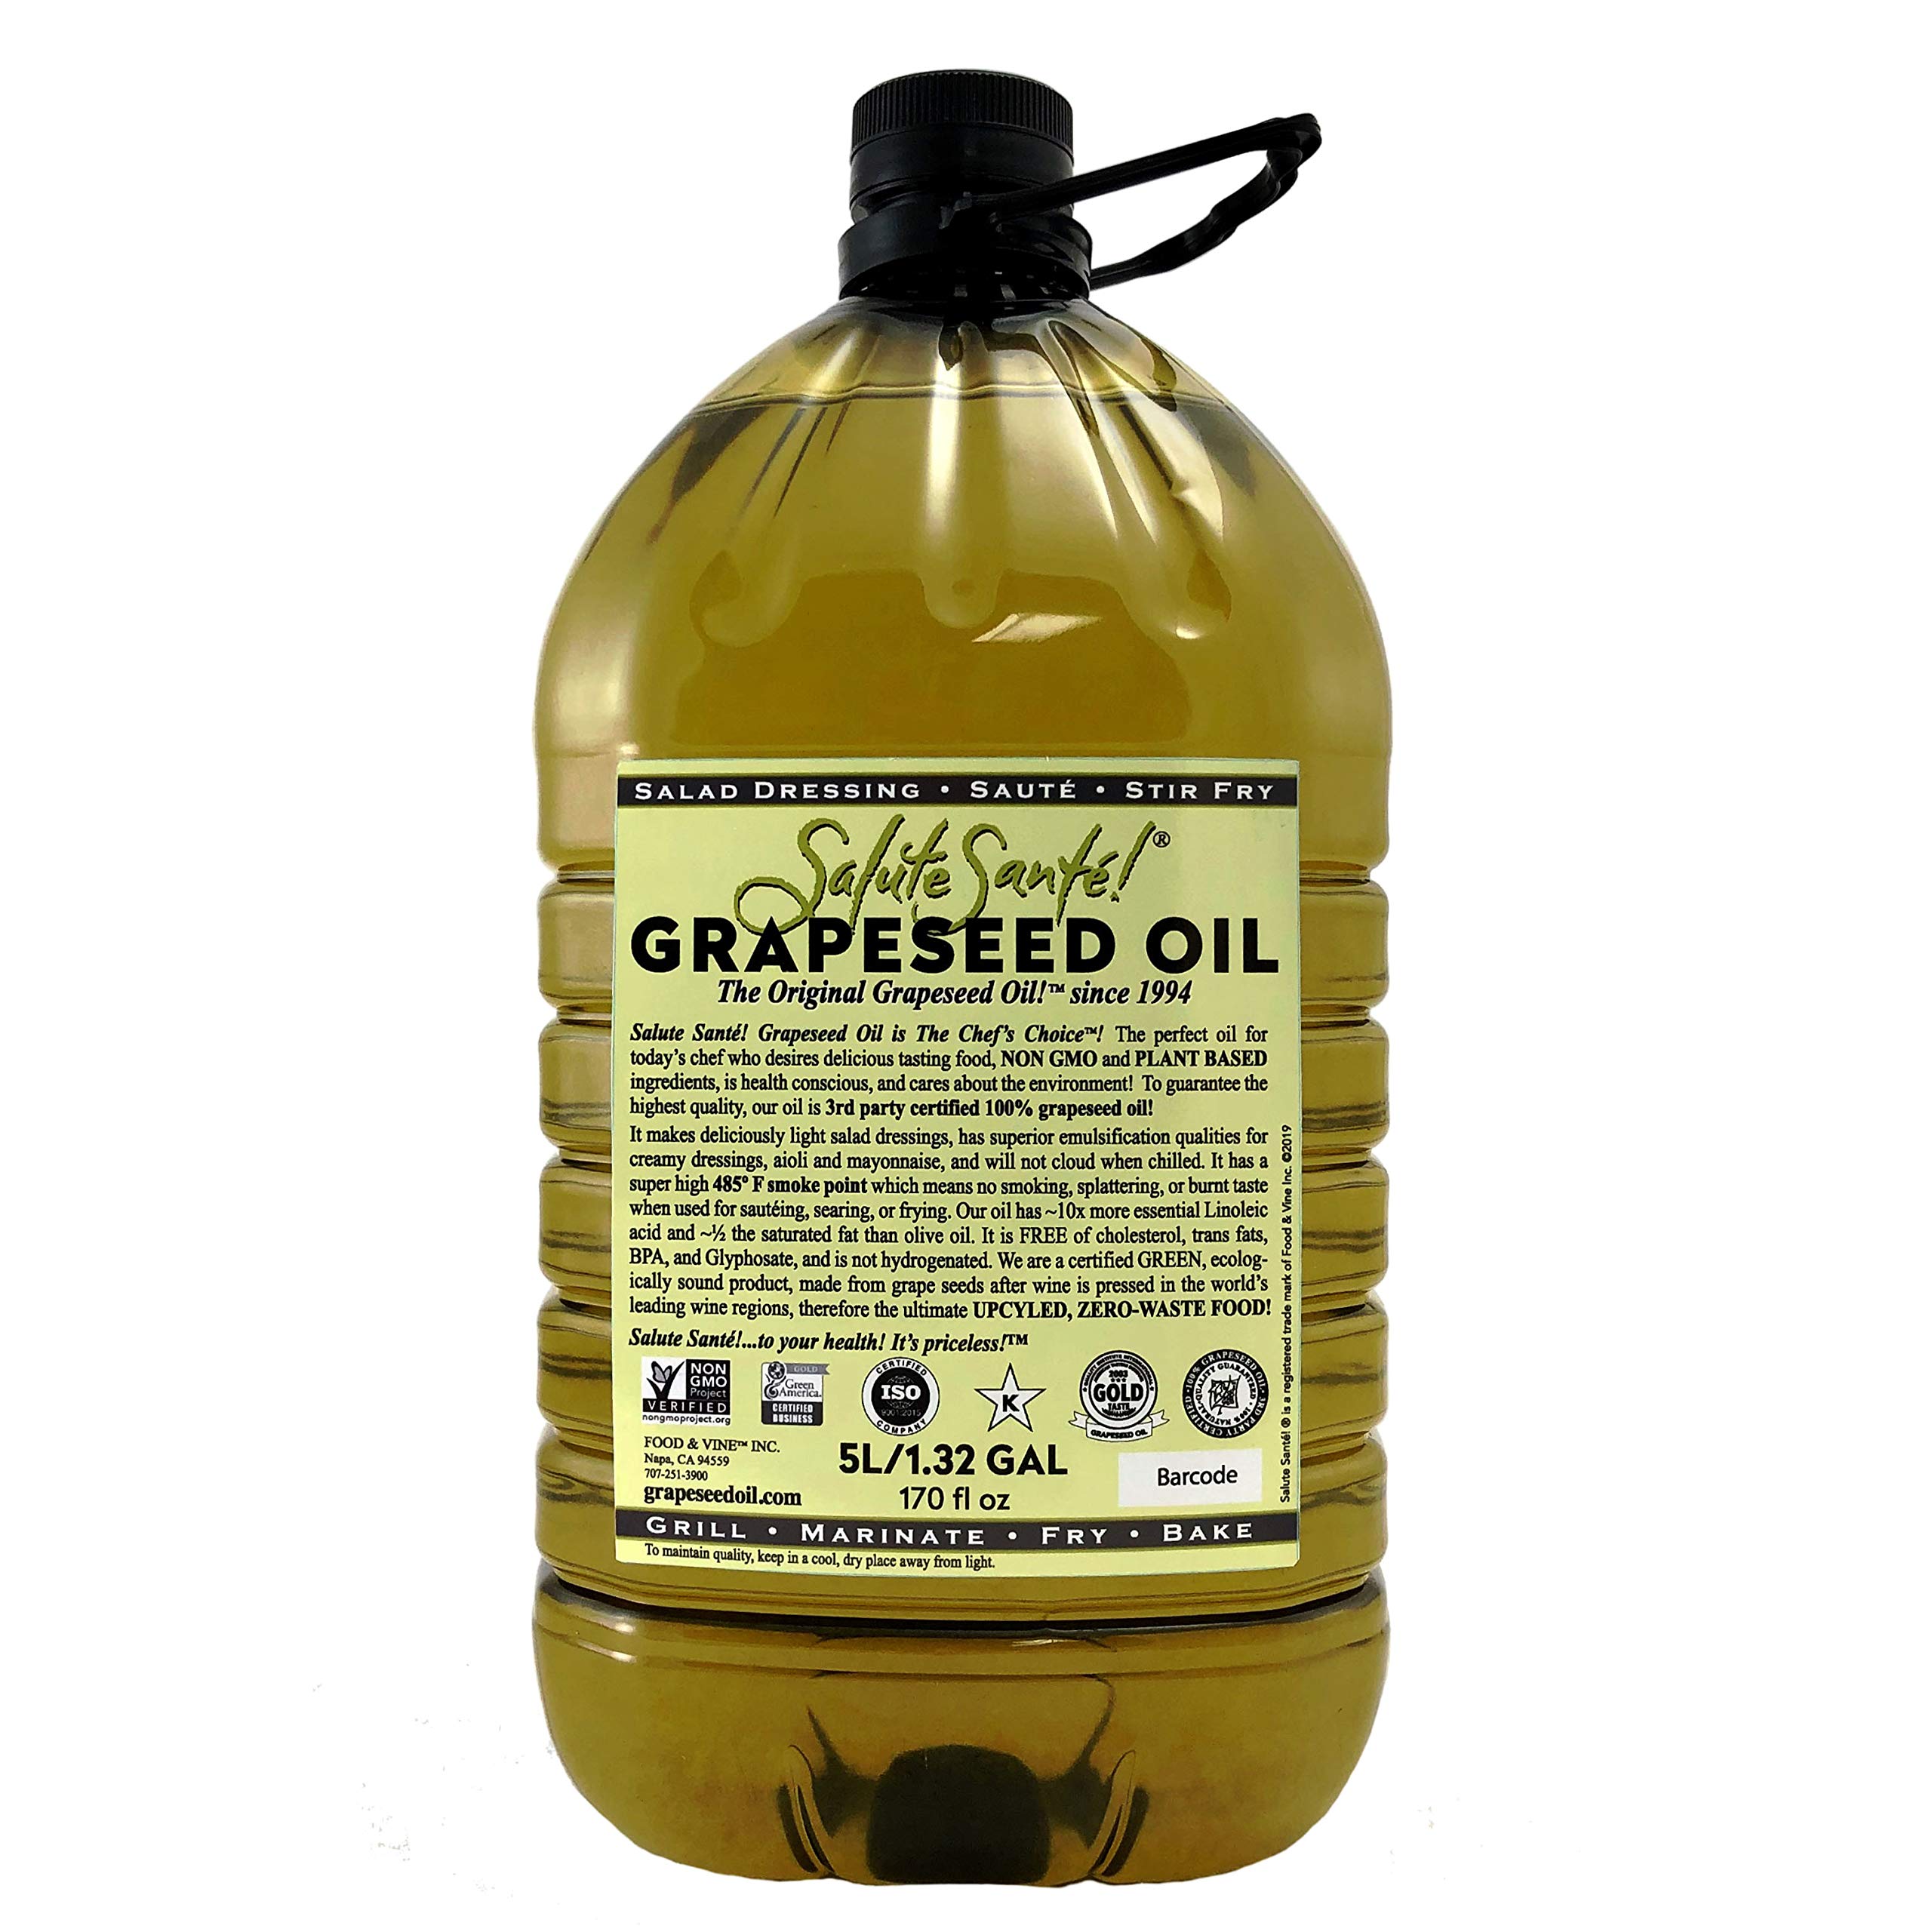 Cold Pressed Grapeseed Oil by Salute Sante! High Temperature